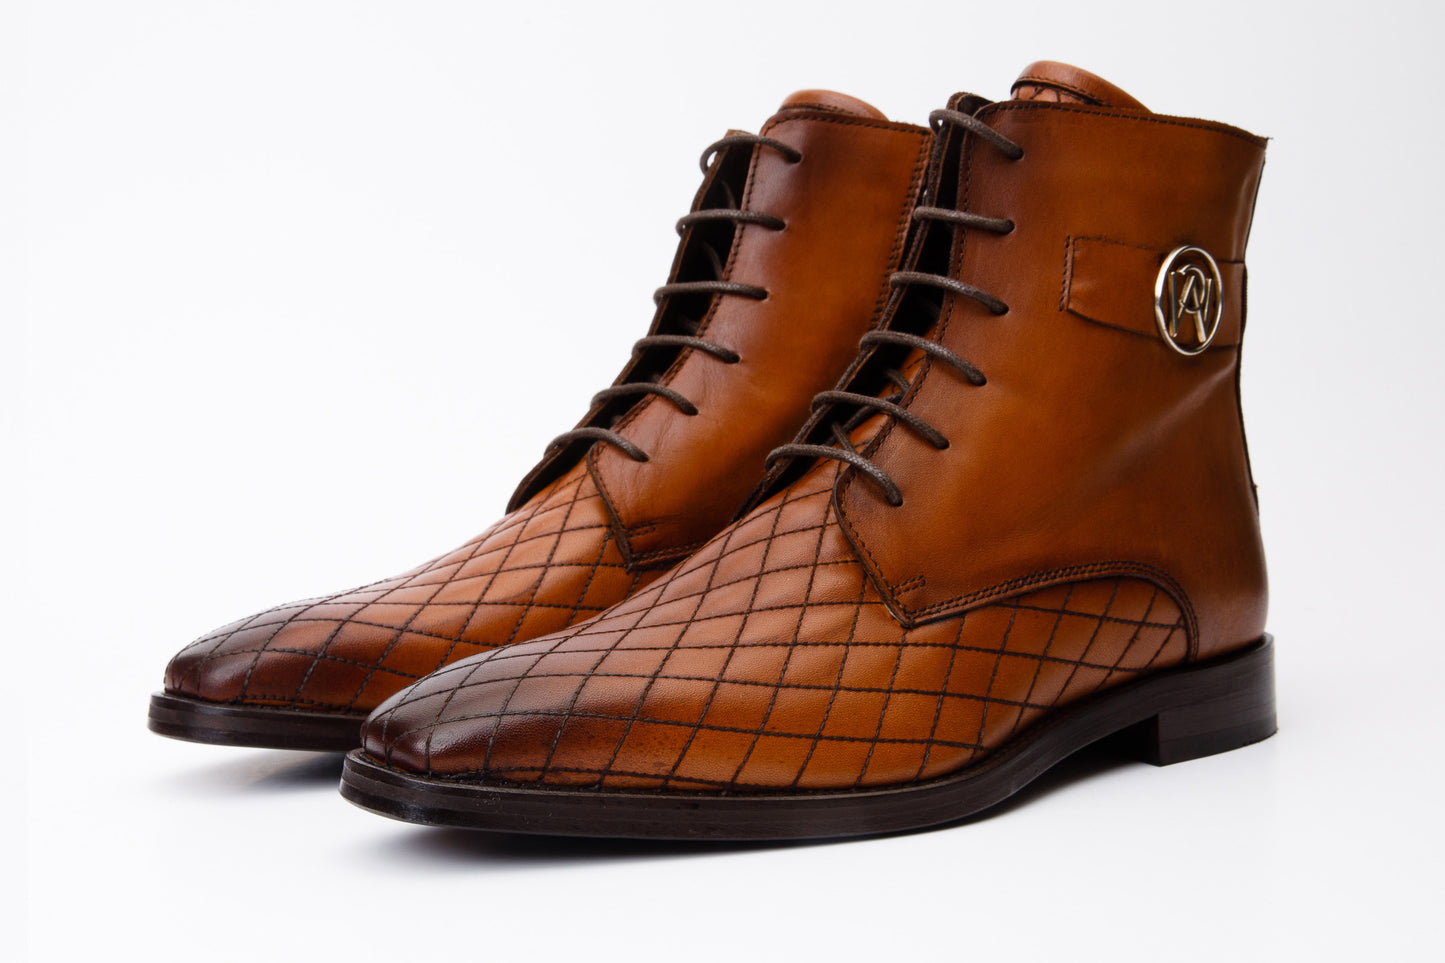 The Zeus Brown Leather Lace-Up Men Boot with a Zipper